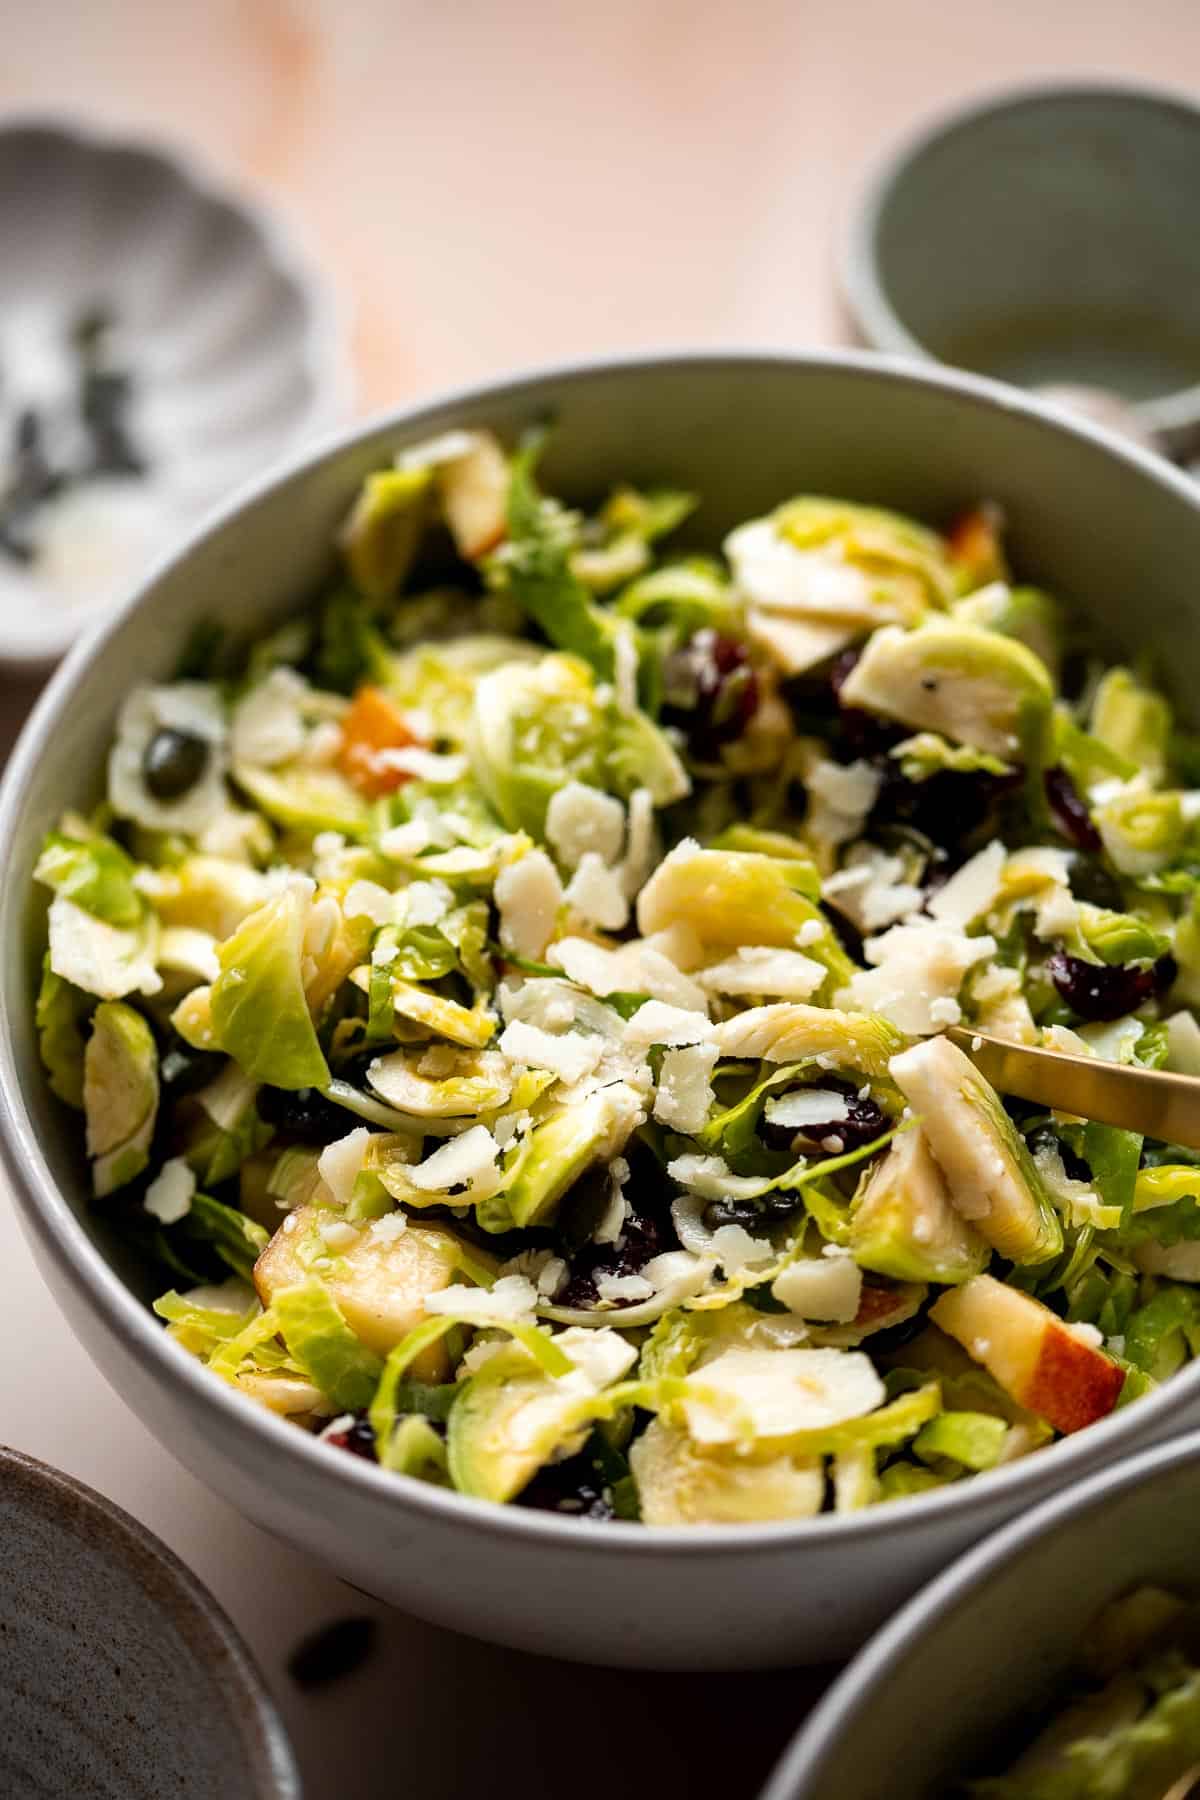 Shaved Brussels Sprout Salad is a delicious fall salad packed with fresh sprouts, apples, cranberries, and crunchy seeds, tossed in a homemade vinaigrette. | aheadofthyme.com